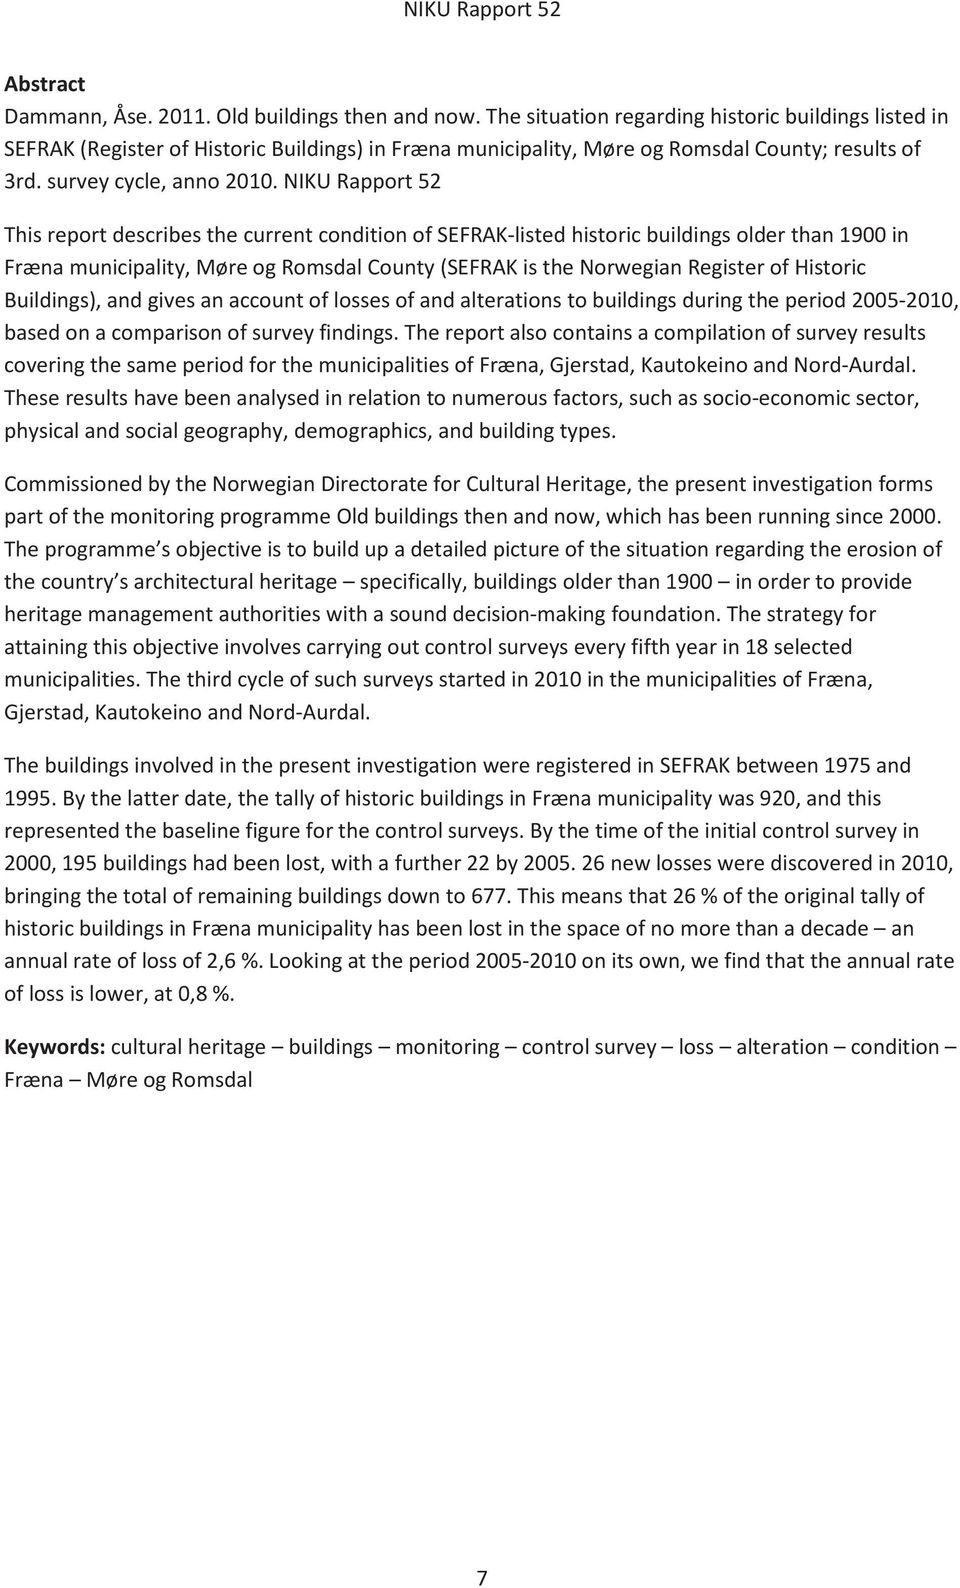 NIKU Rapport 52 This report describes the current condition of SEFRAK-listed historic buildings older than 1900 in Fræna municipality, Møre og Romsdal County (SEFRAK is the Norwegian Register of